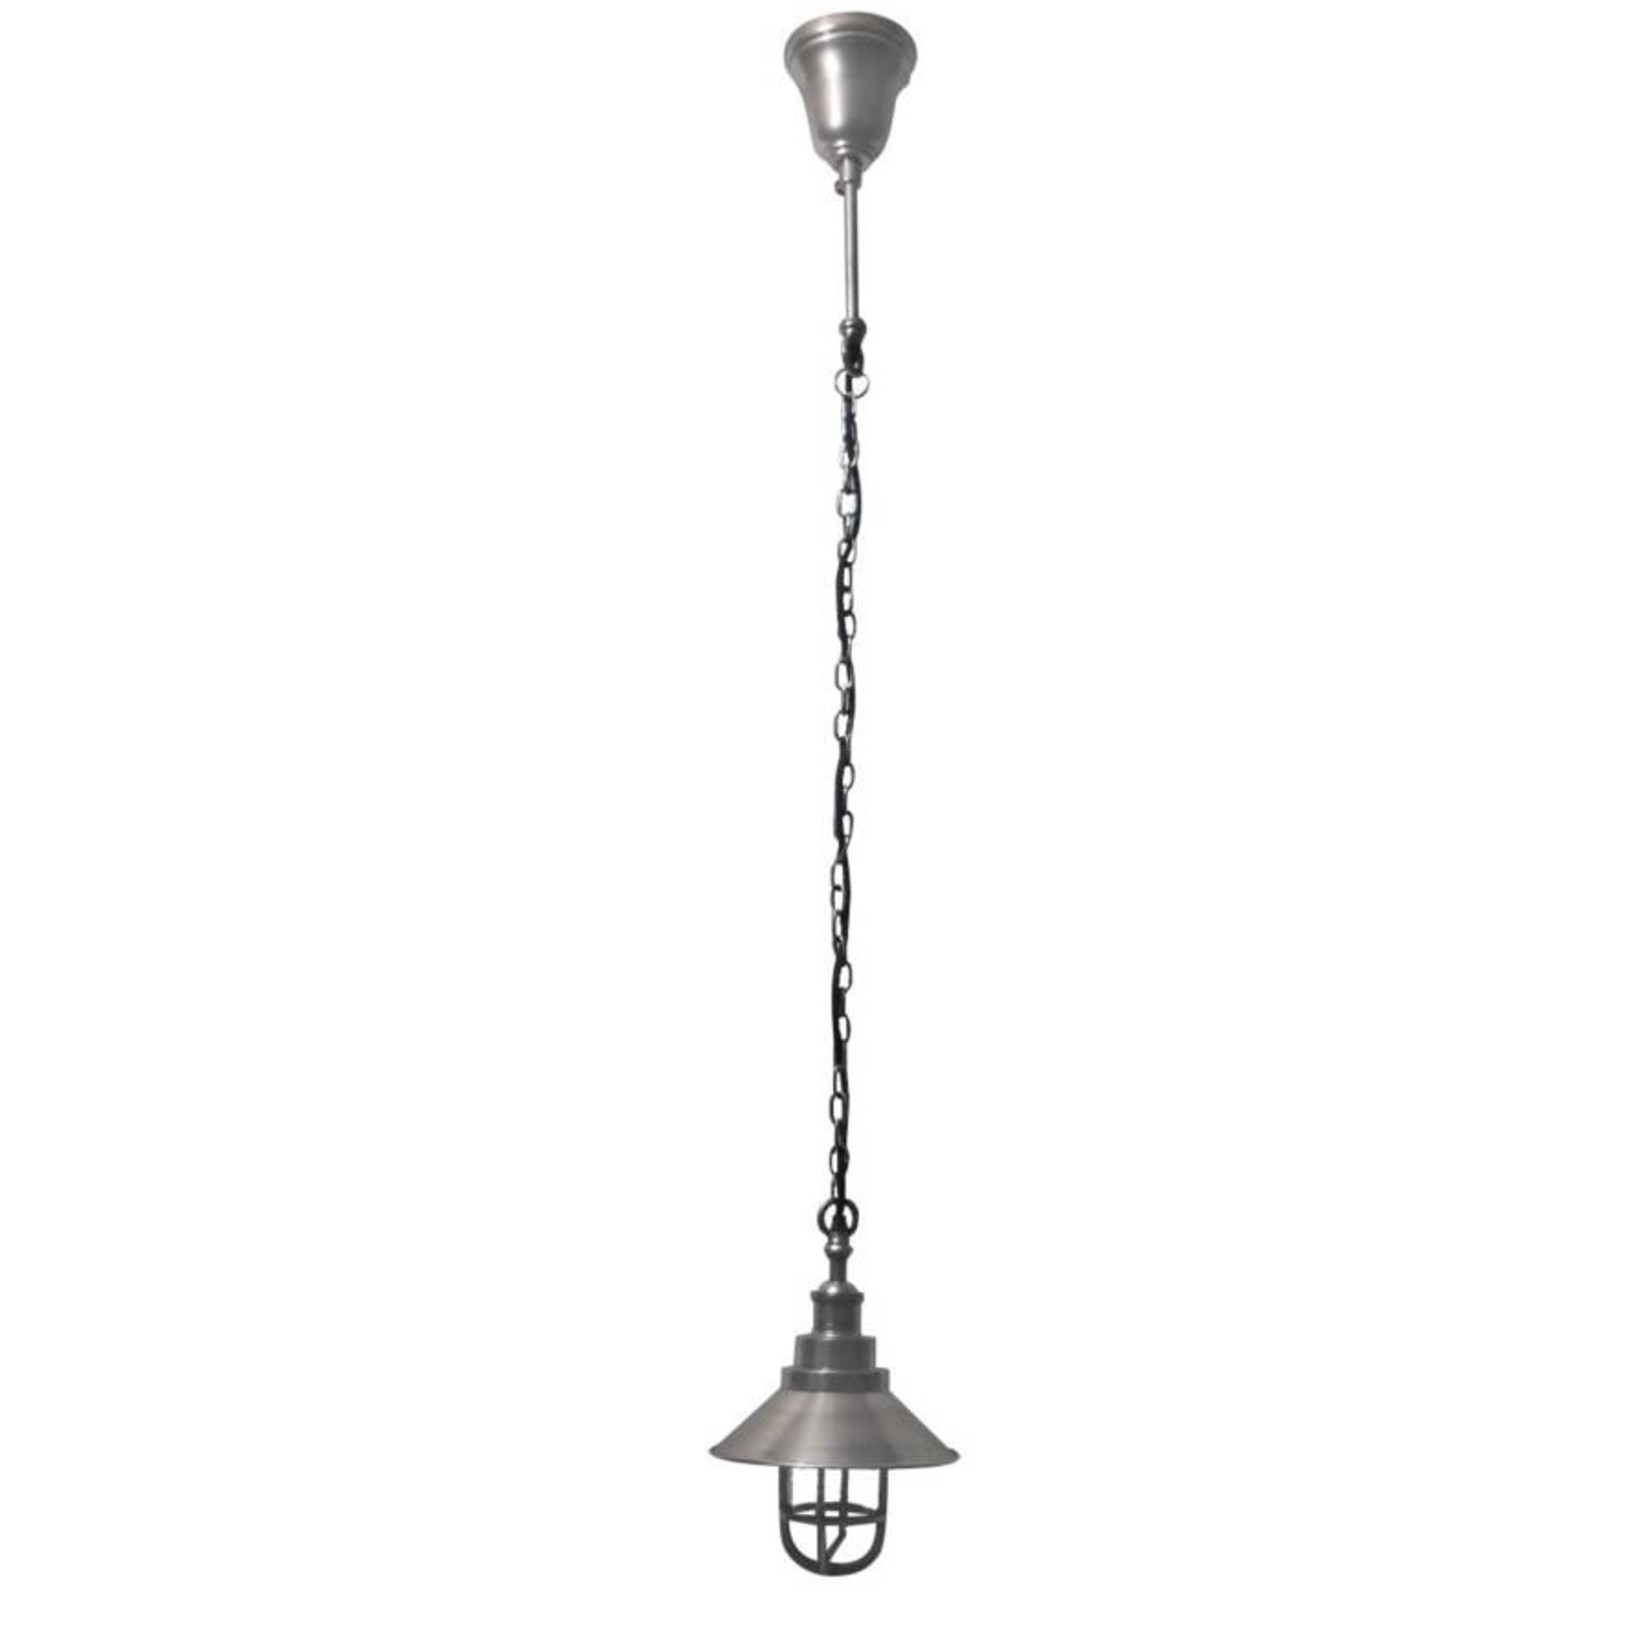 North American Country Home Pippa Hanging Lamp